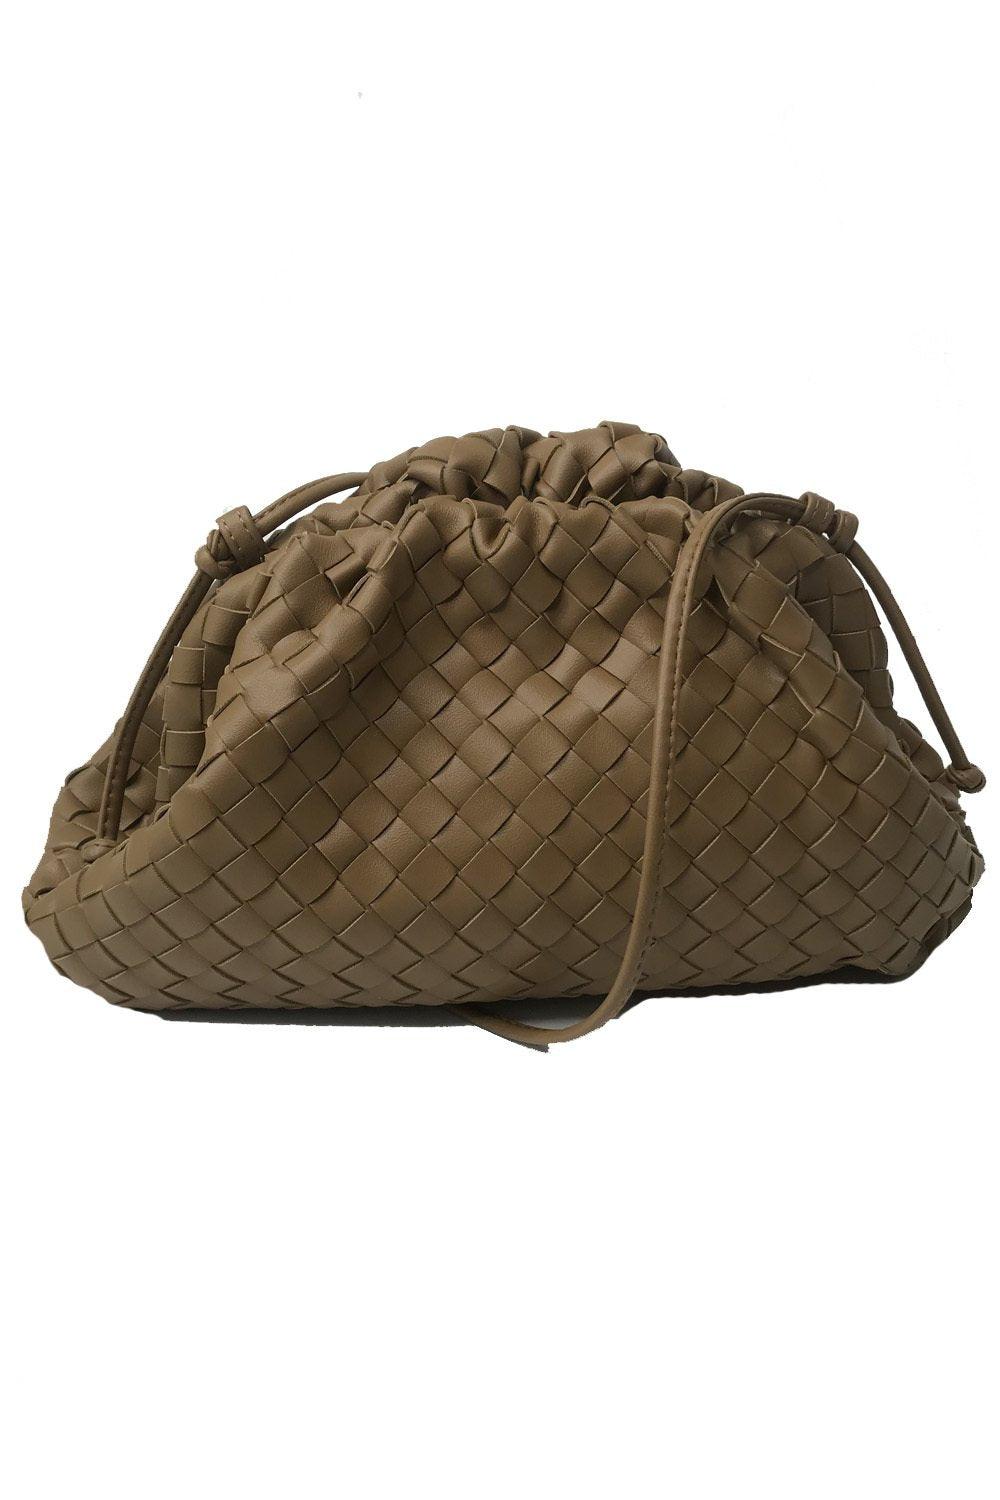 OutDazl - Large Woven Gathered Clutch in Brown - OutDazl